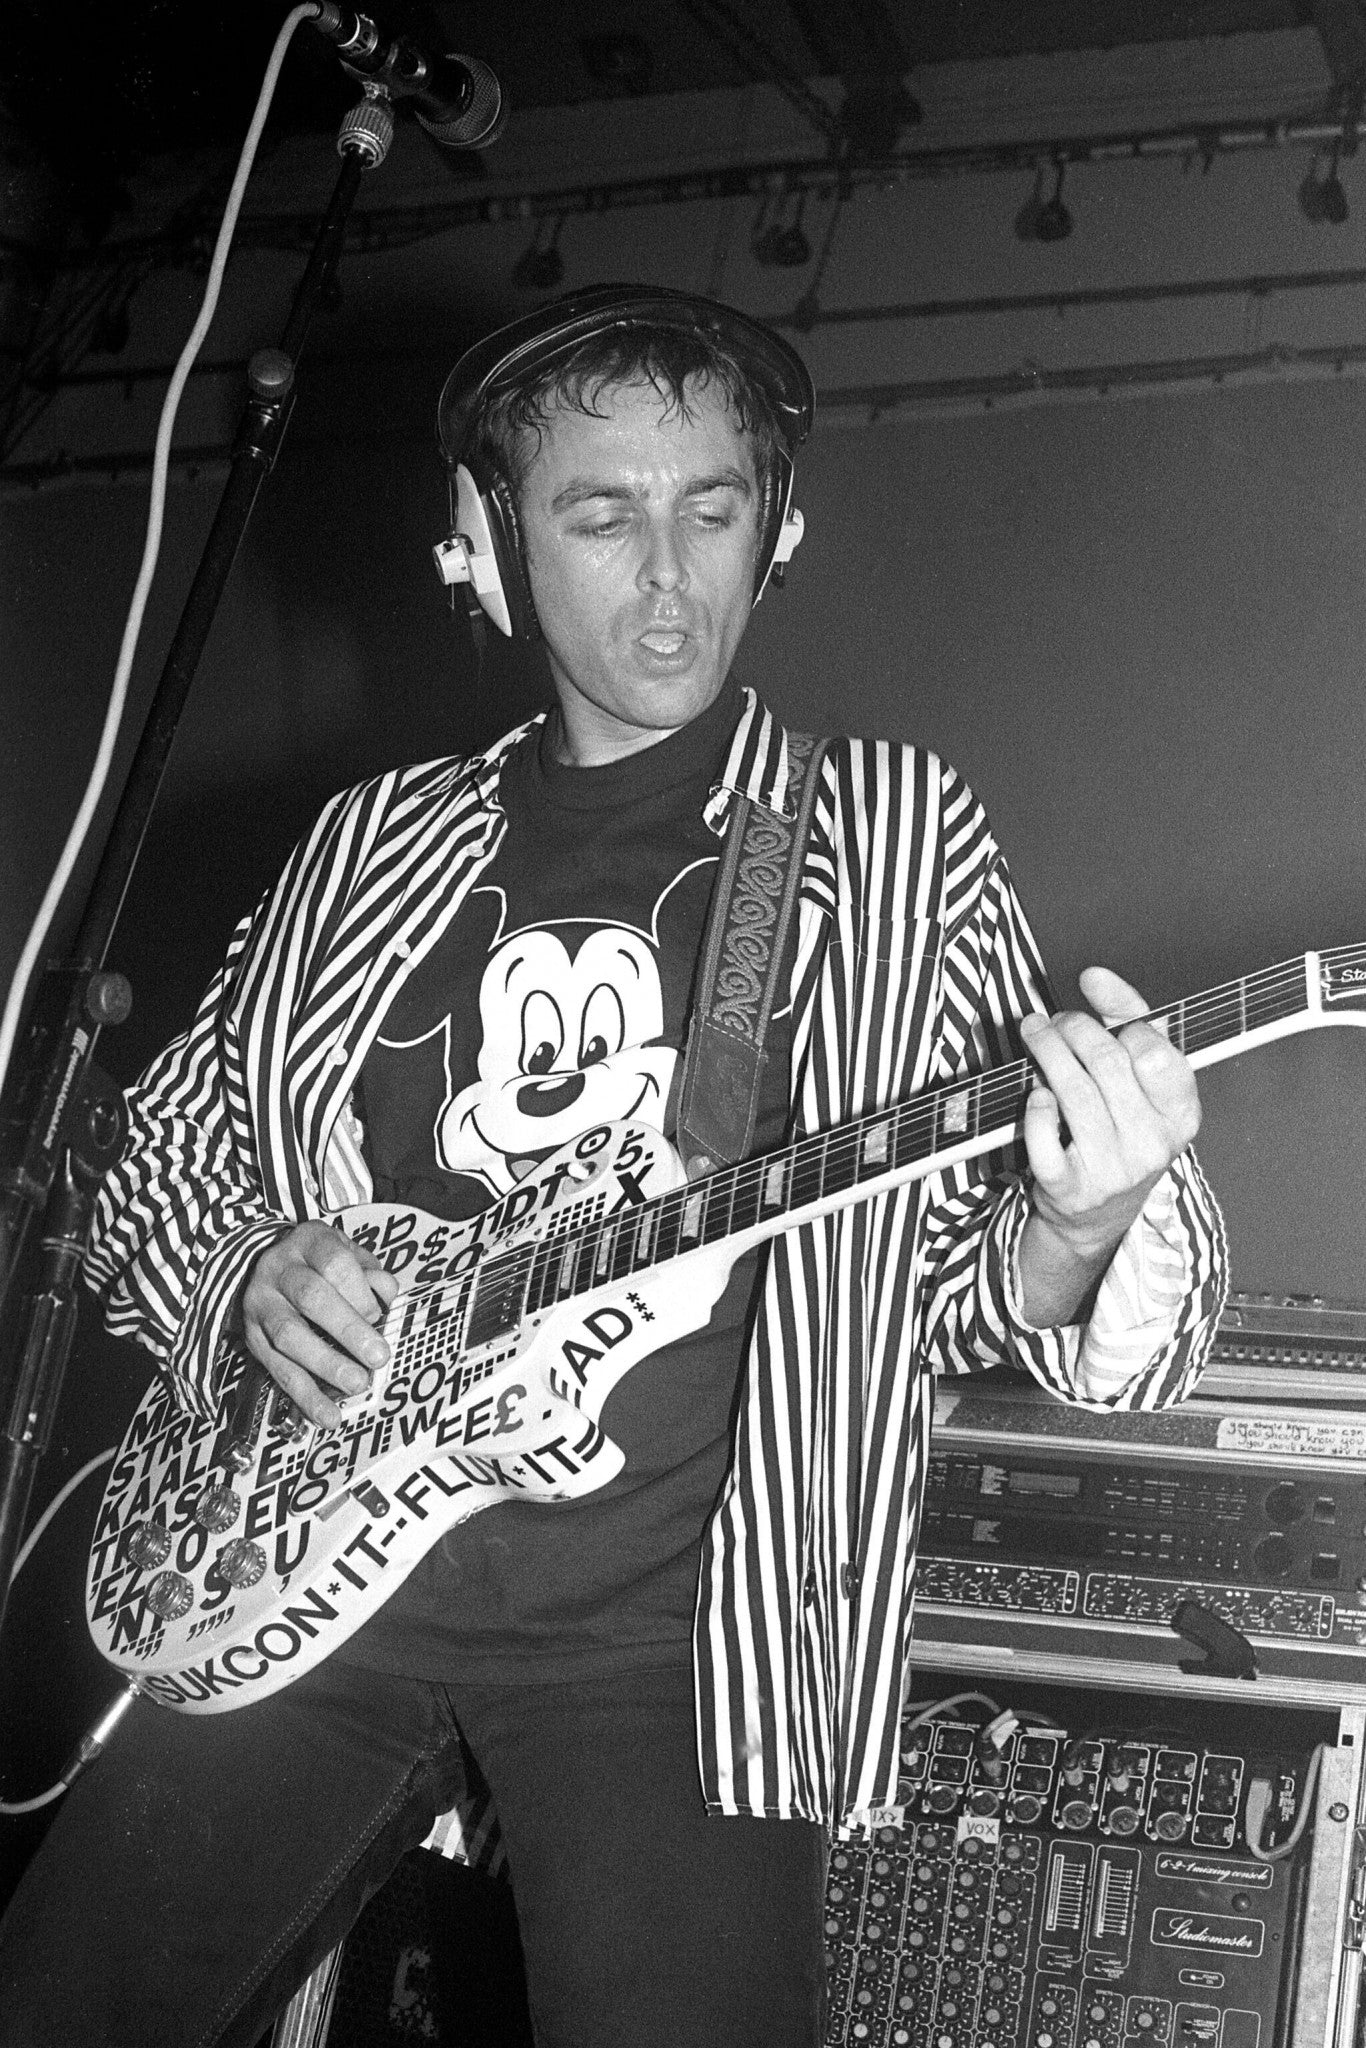 Underworld - Karl Hyde Playing Guitar on Stage, England, 1994 Poster (1/3)